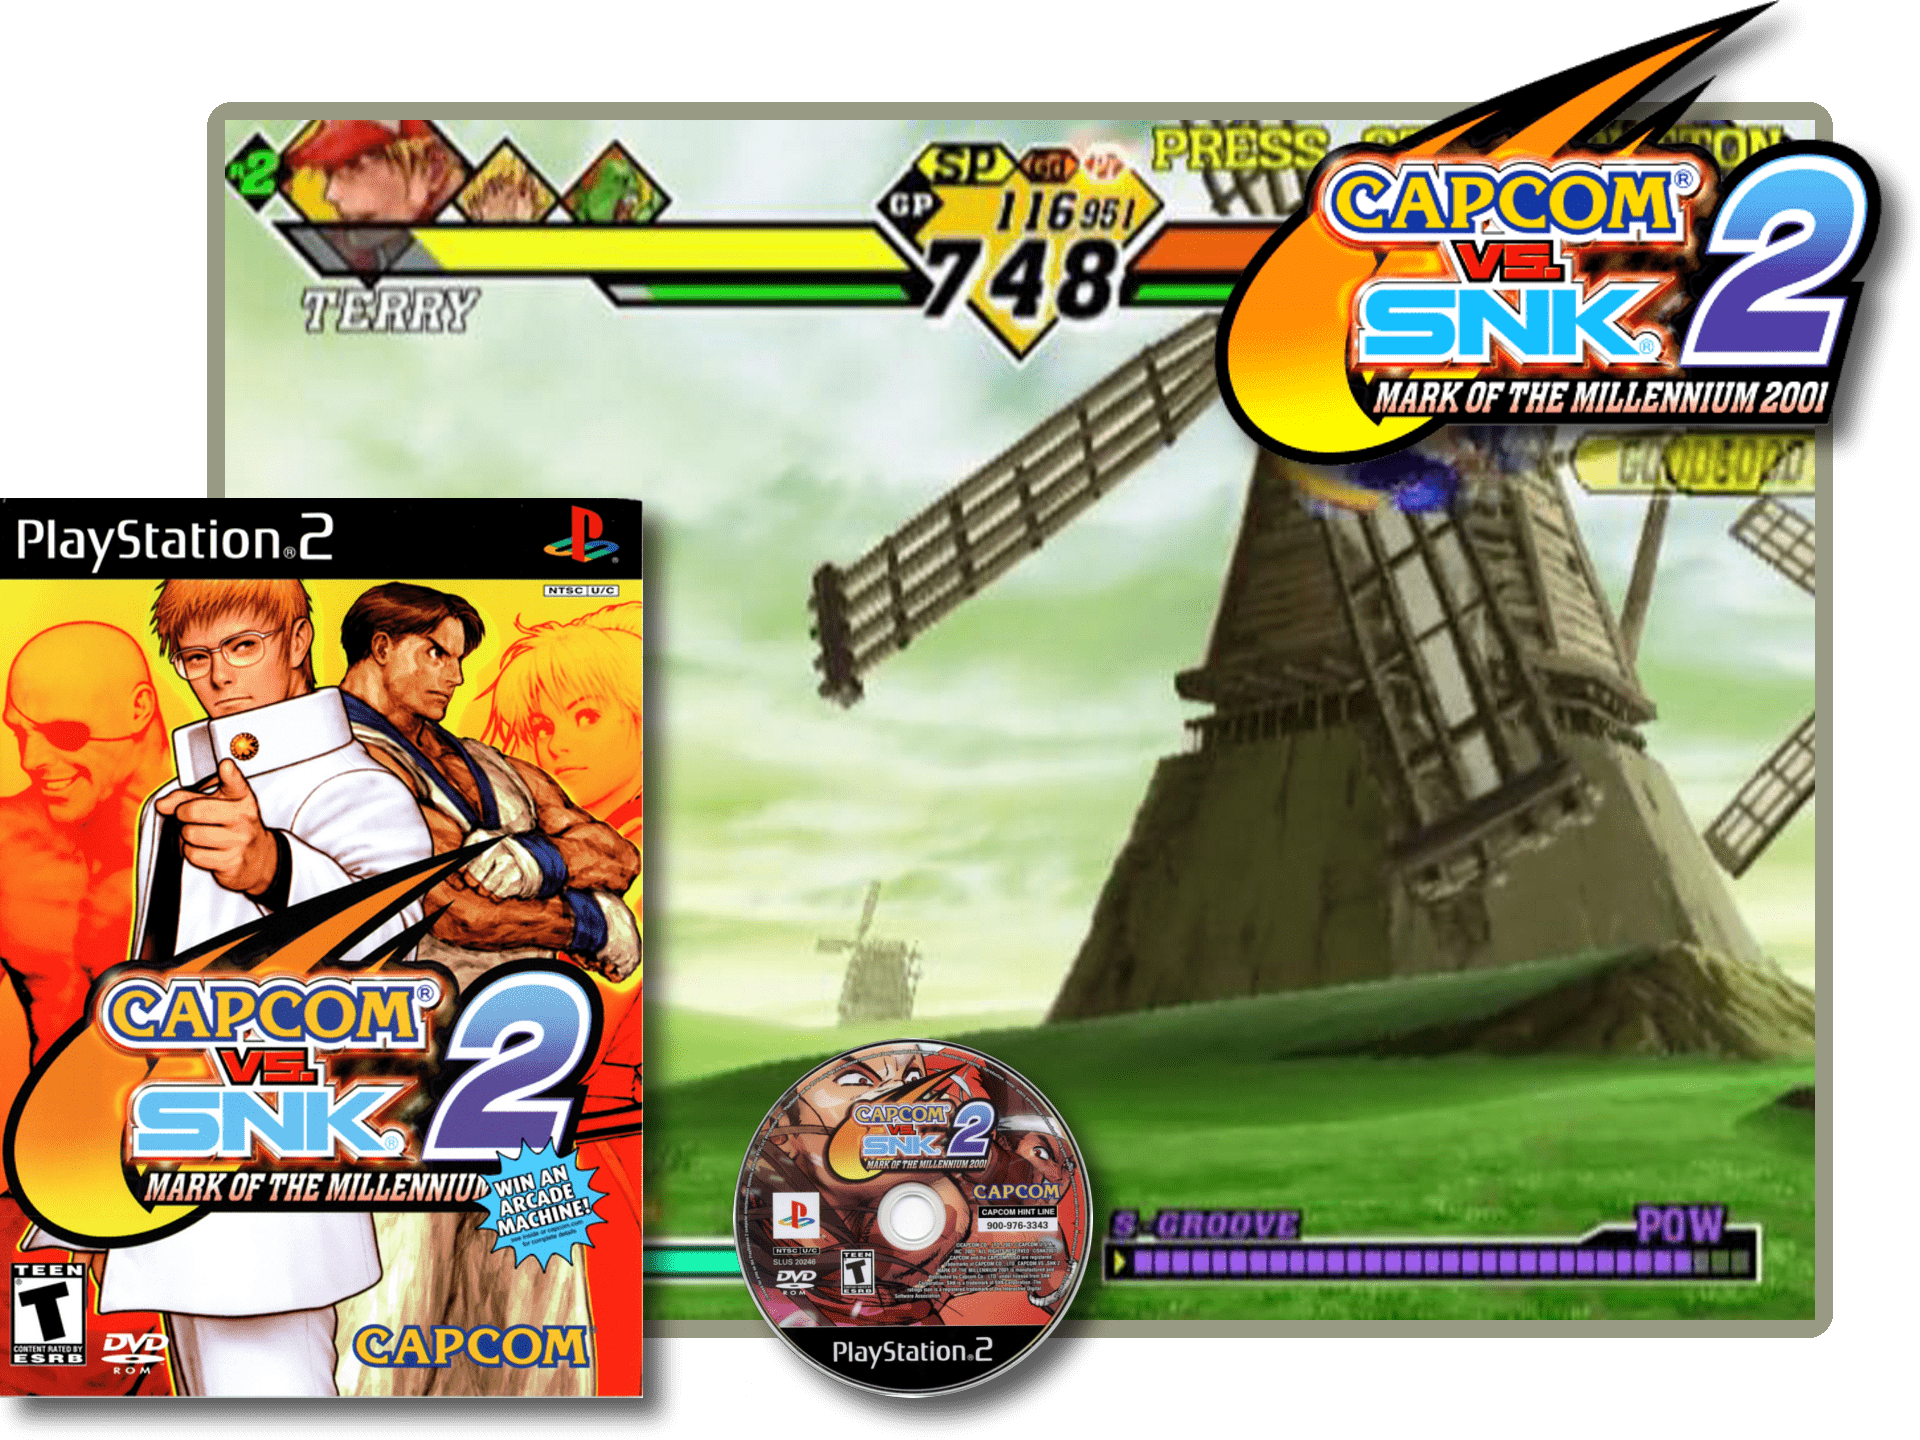 The King of Fighters 2002 - Solaris Japan